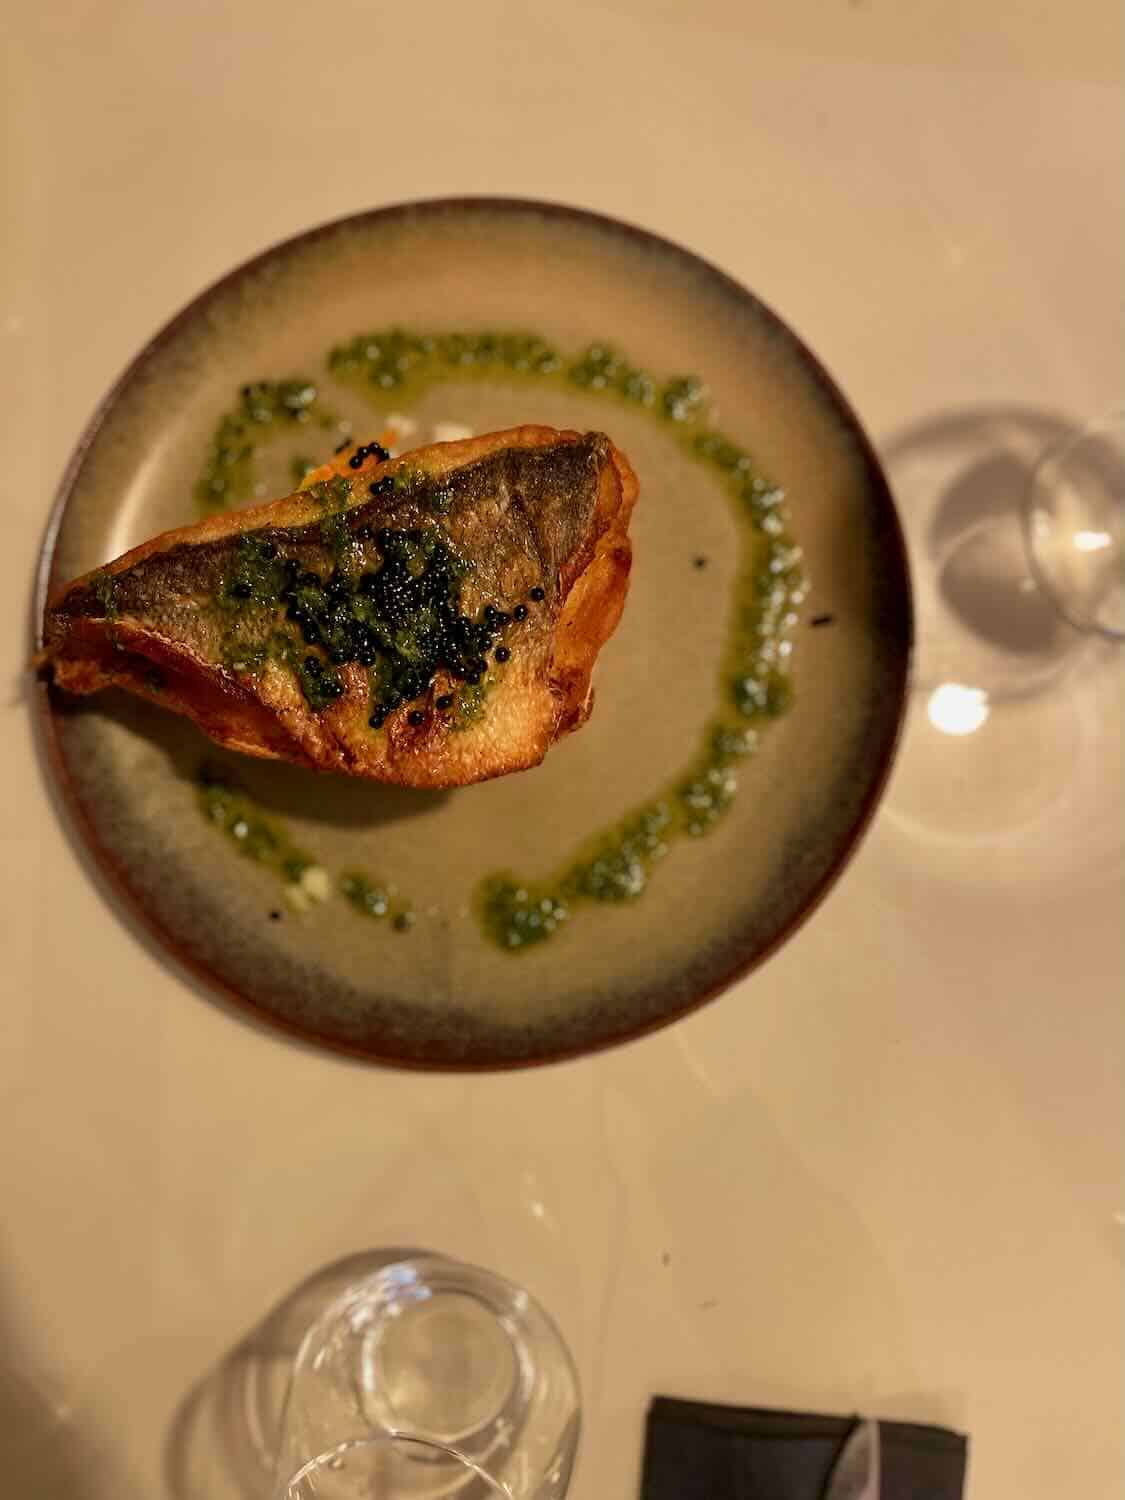 A plate of grilled fish topped with a green herb sauce, presented on a ceramic plate with decorative green sauce at a restaurant in Tavira.